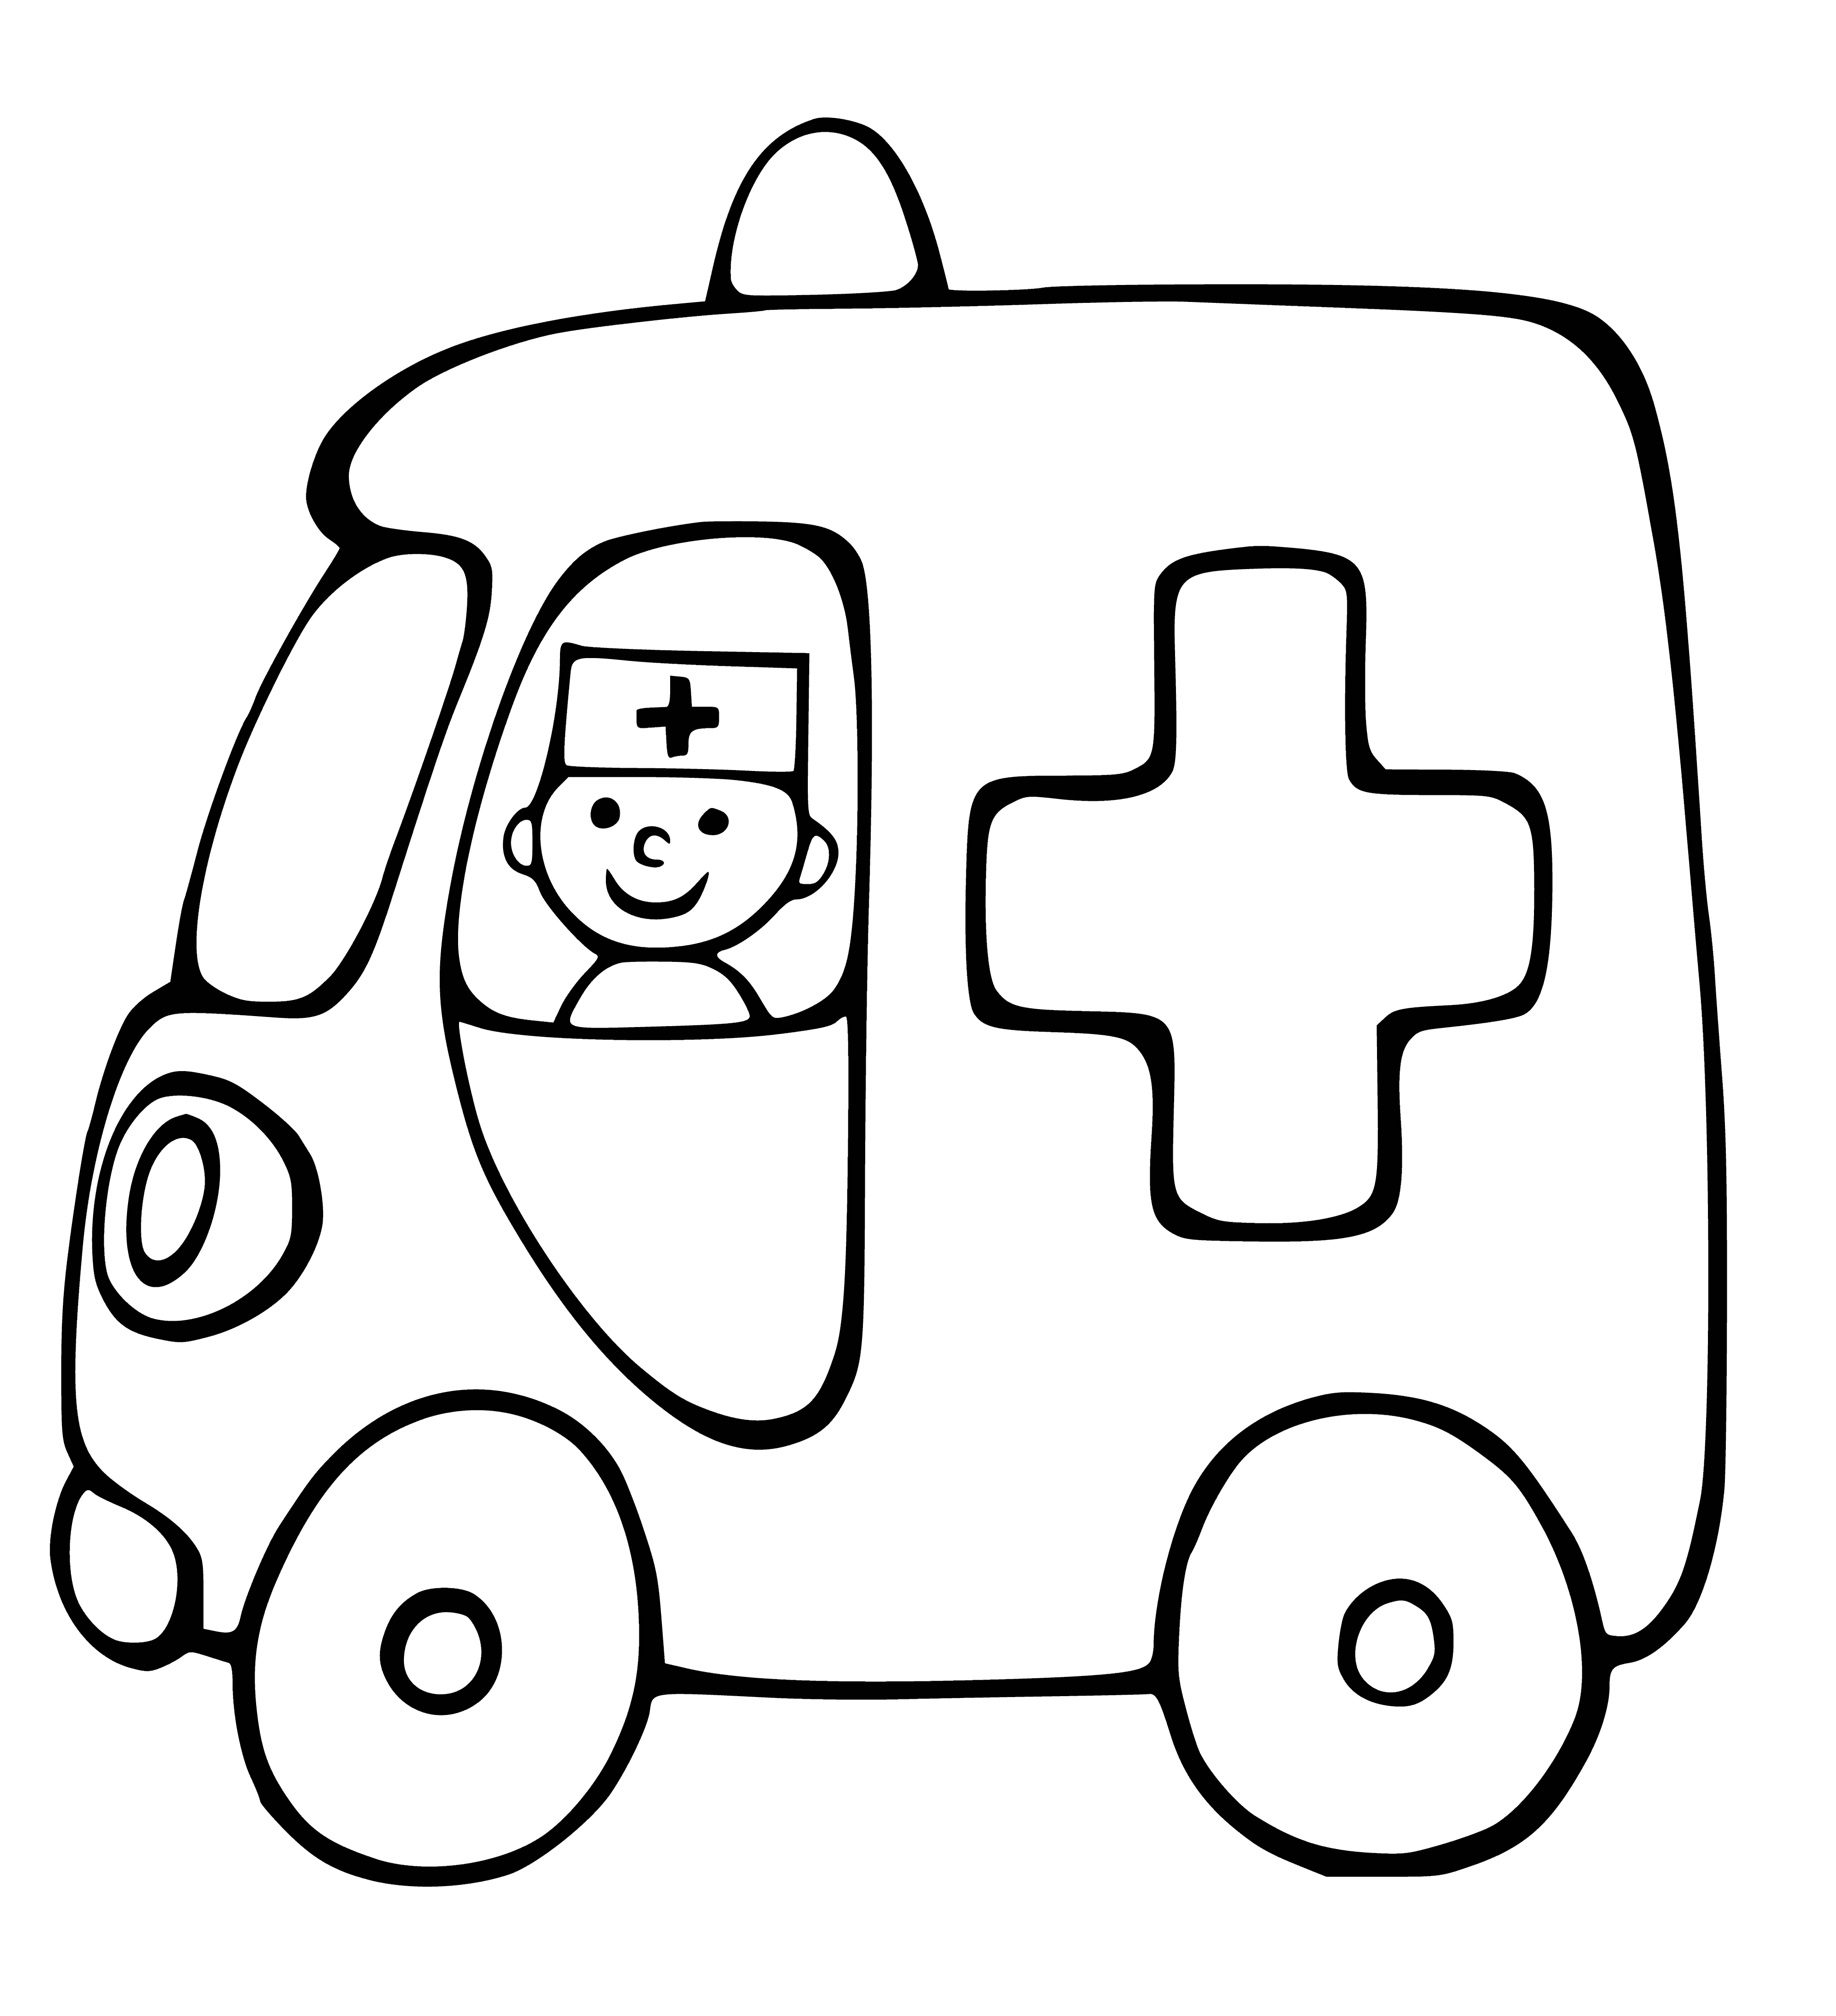 coloring page: Ambulance transports sick/injured to hospital for medical help.